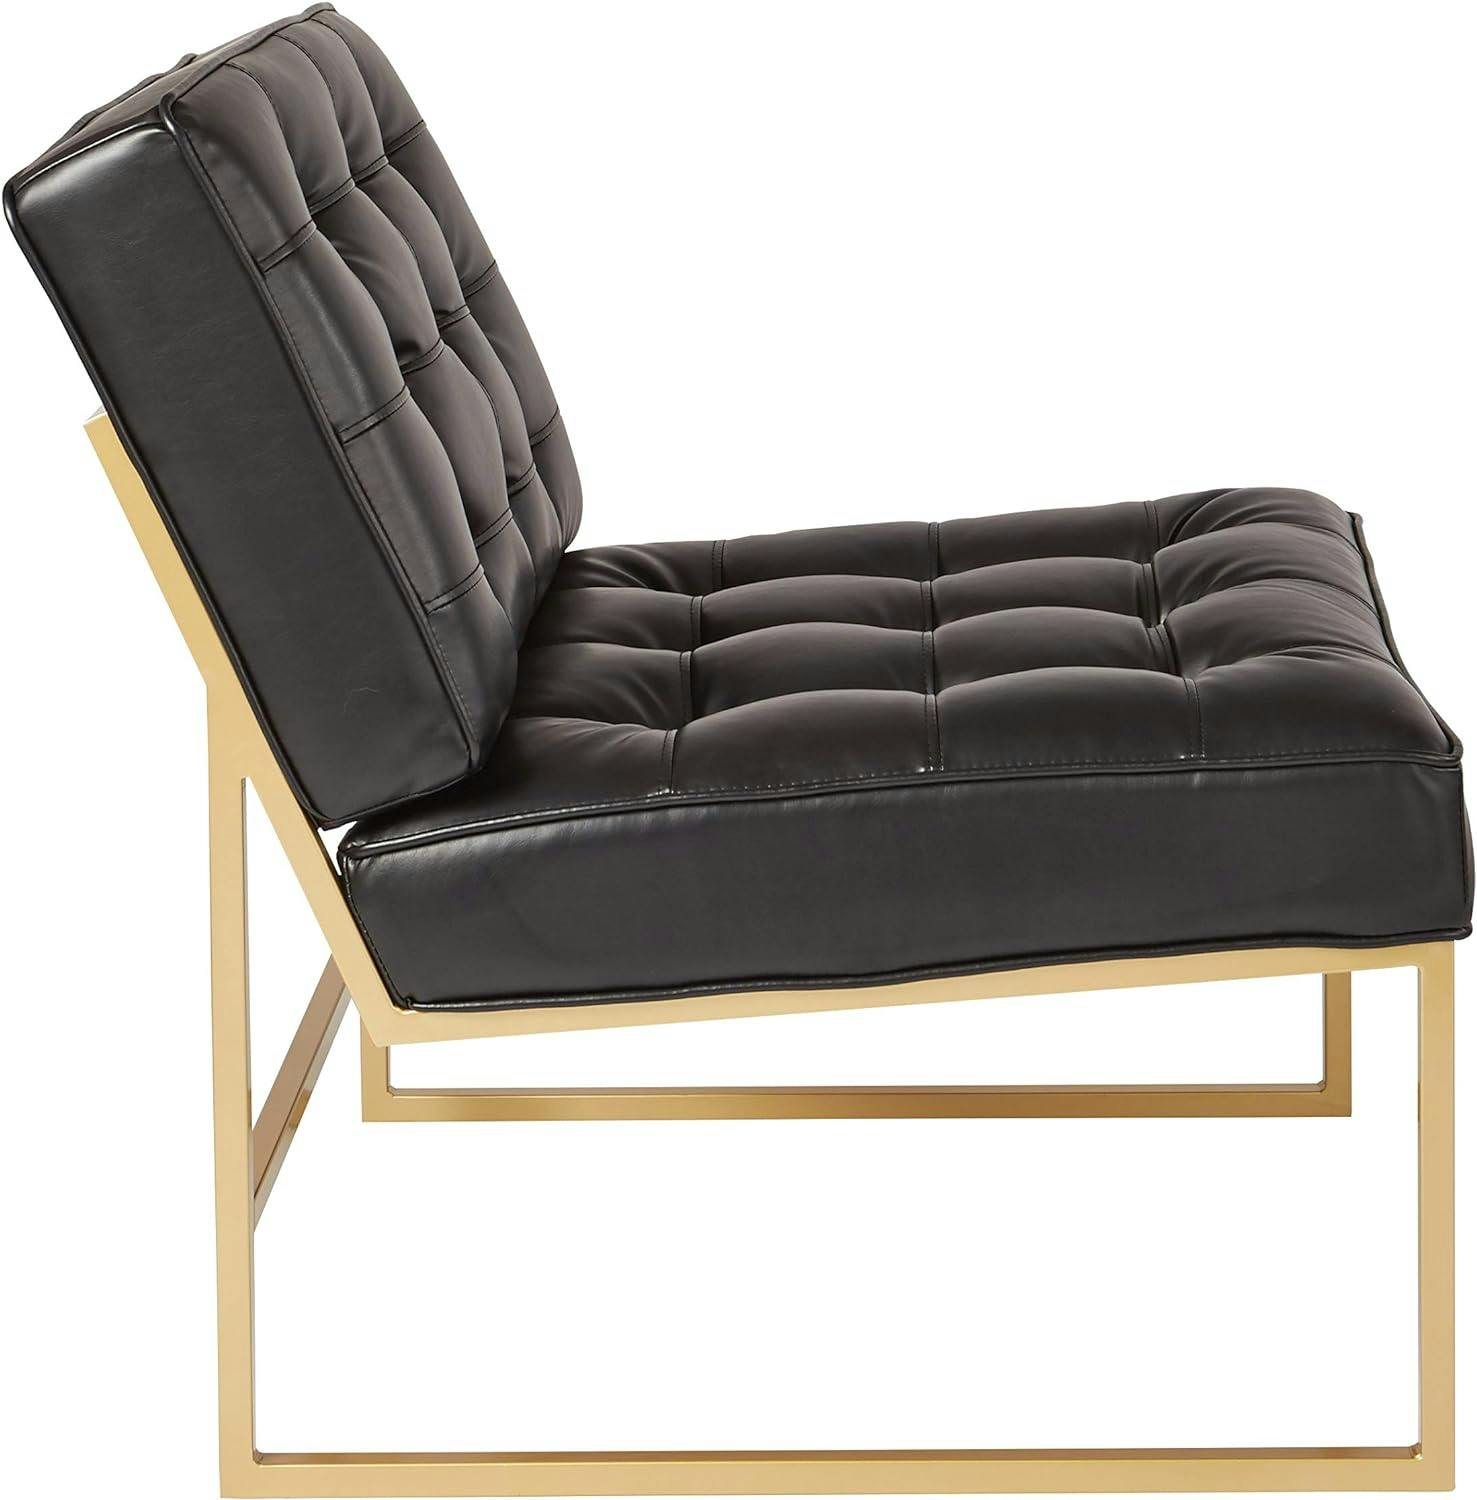 Transitional Anthony Black Faux Leather Chair with Gold Metal Frame